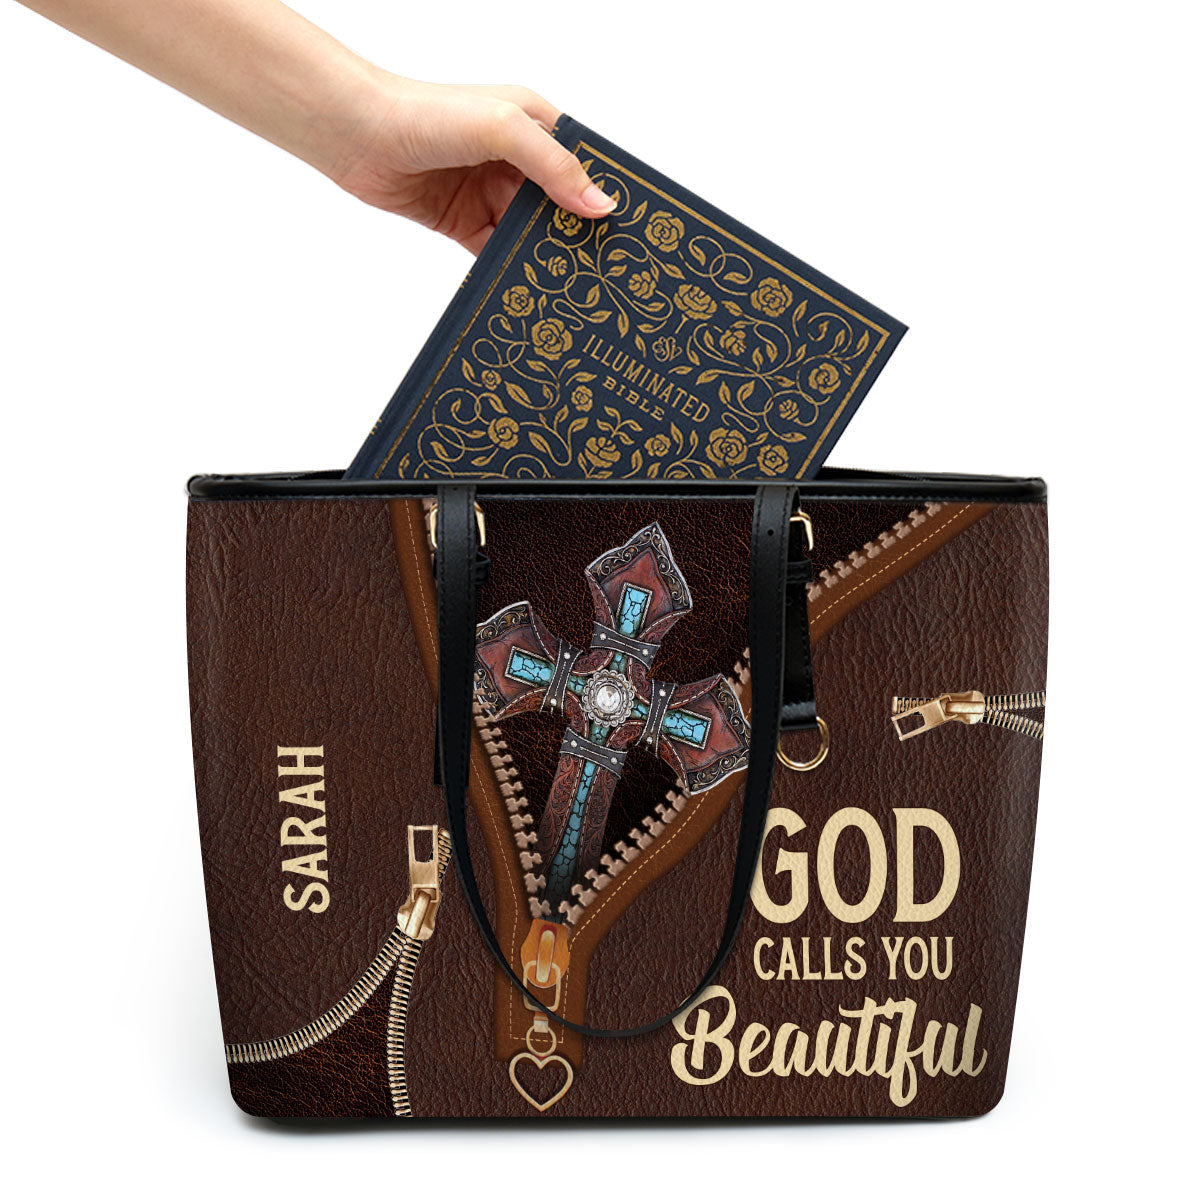 God Calls You Beautiful Lovely Personalized Large Leather Tote Bag - Christian Gifts For Women